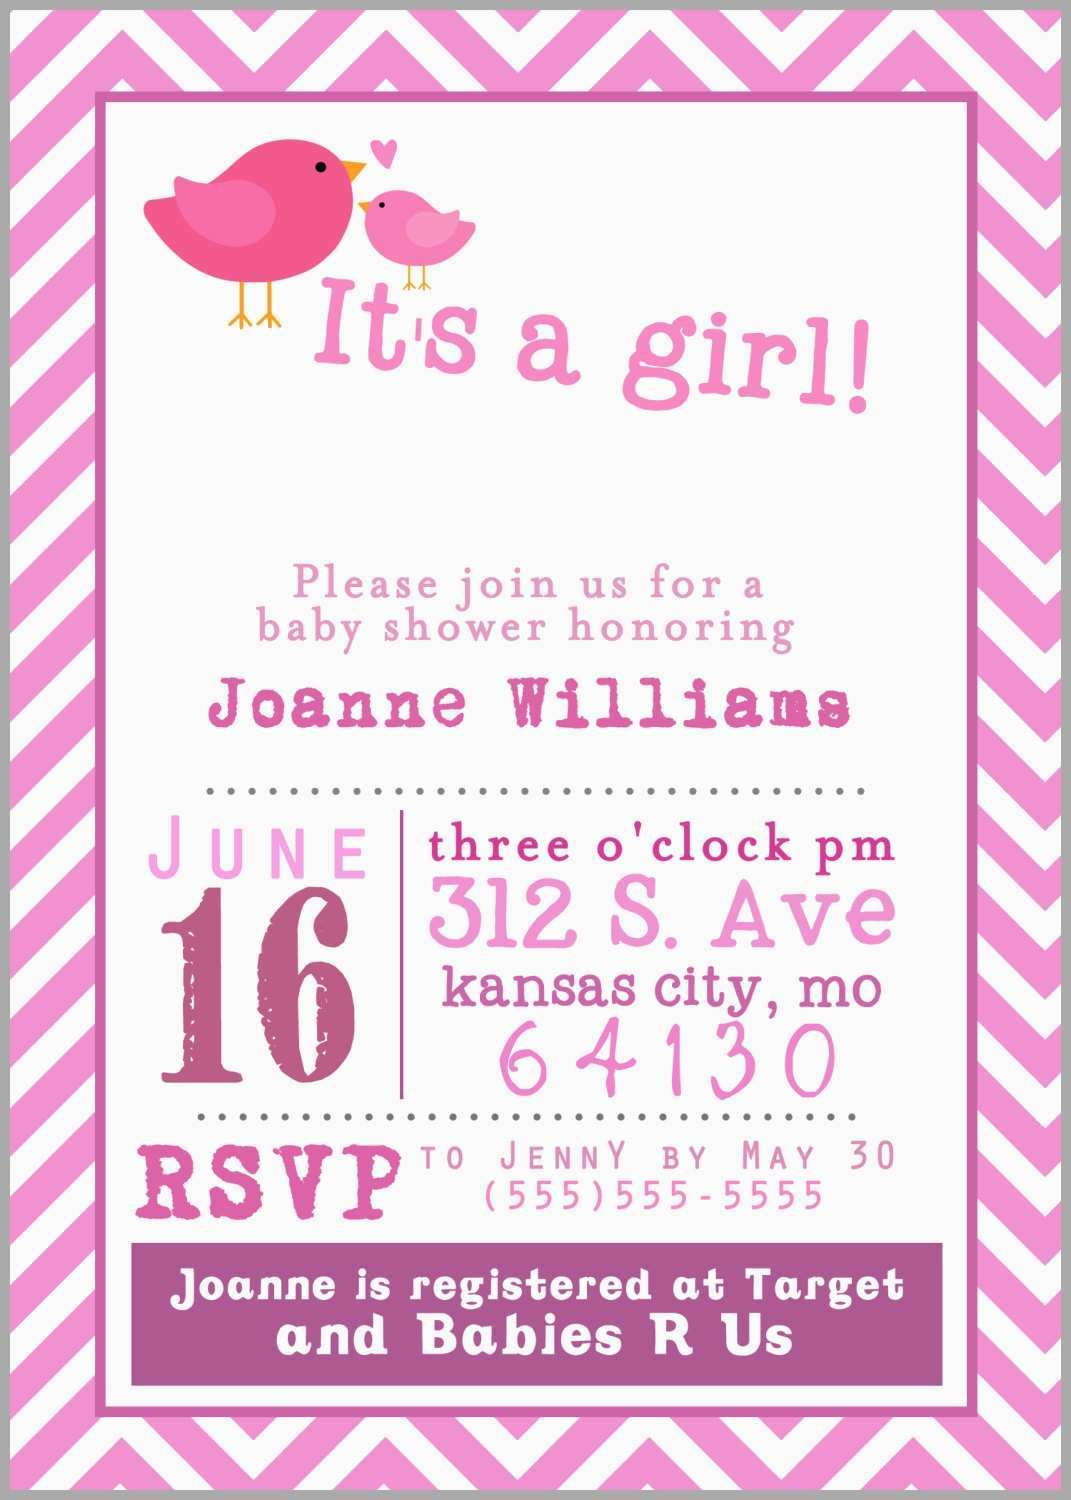 Create Your Own Baby Shower Invitations Free Printable New Baby - Create Your Own Baby Shower Invitations Free Printable